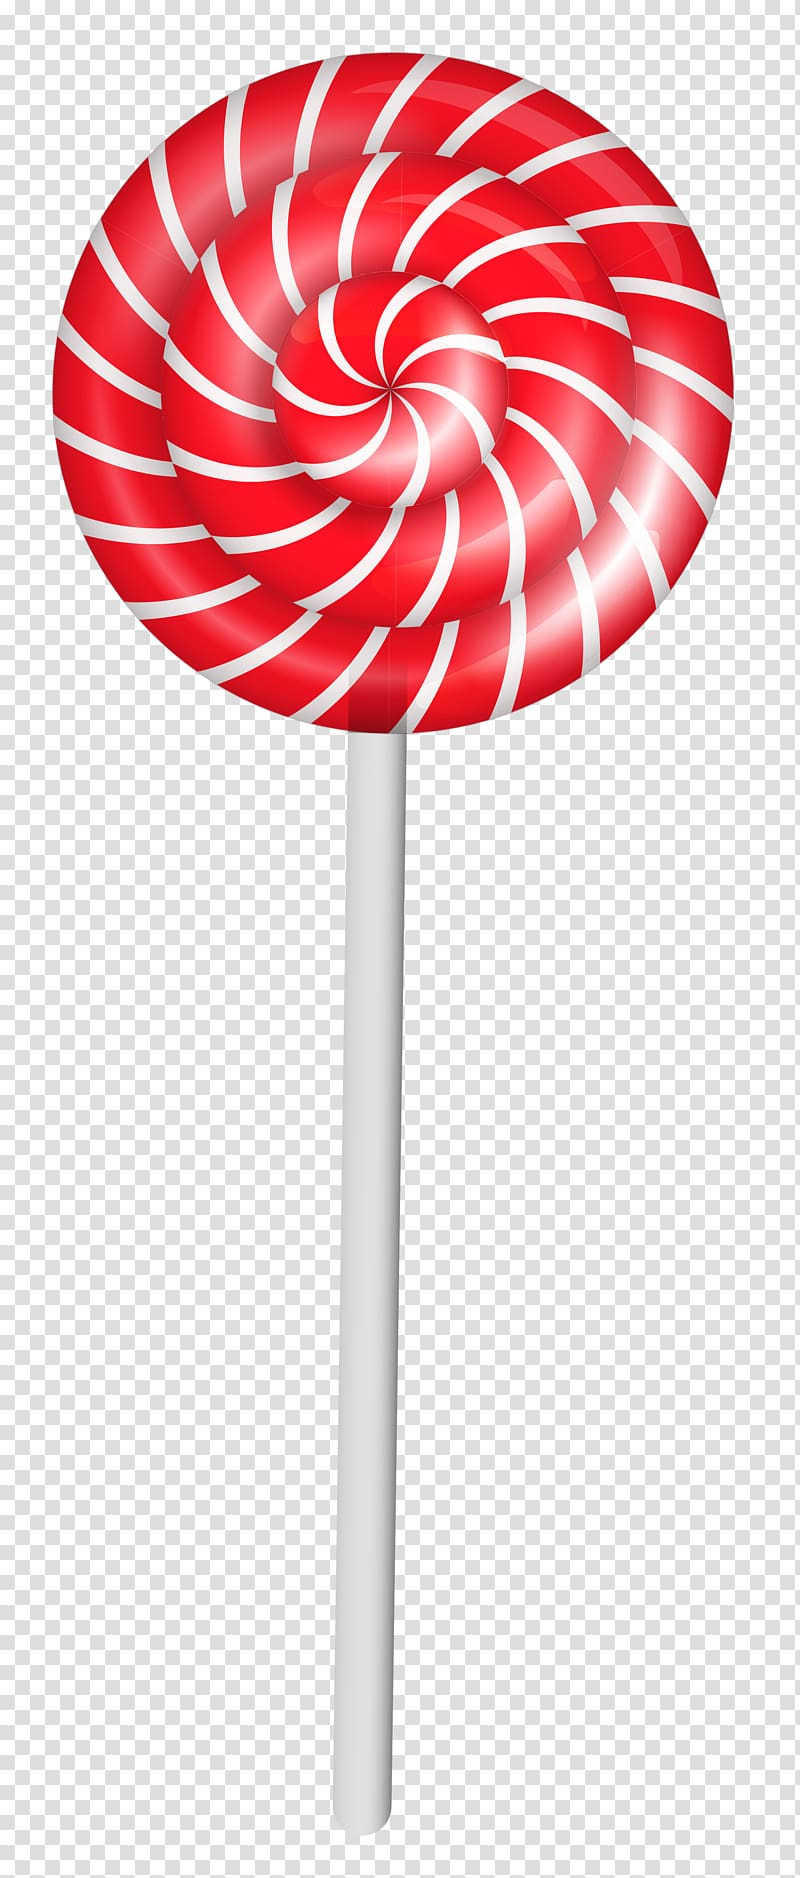 red and white lollipop, Android Lollipop Icon, Striped Lollipop transparent background PNG clipart